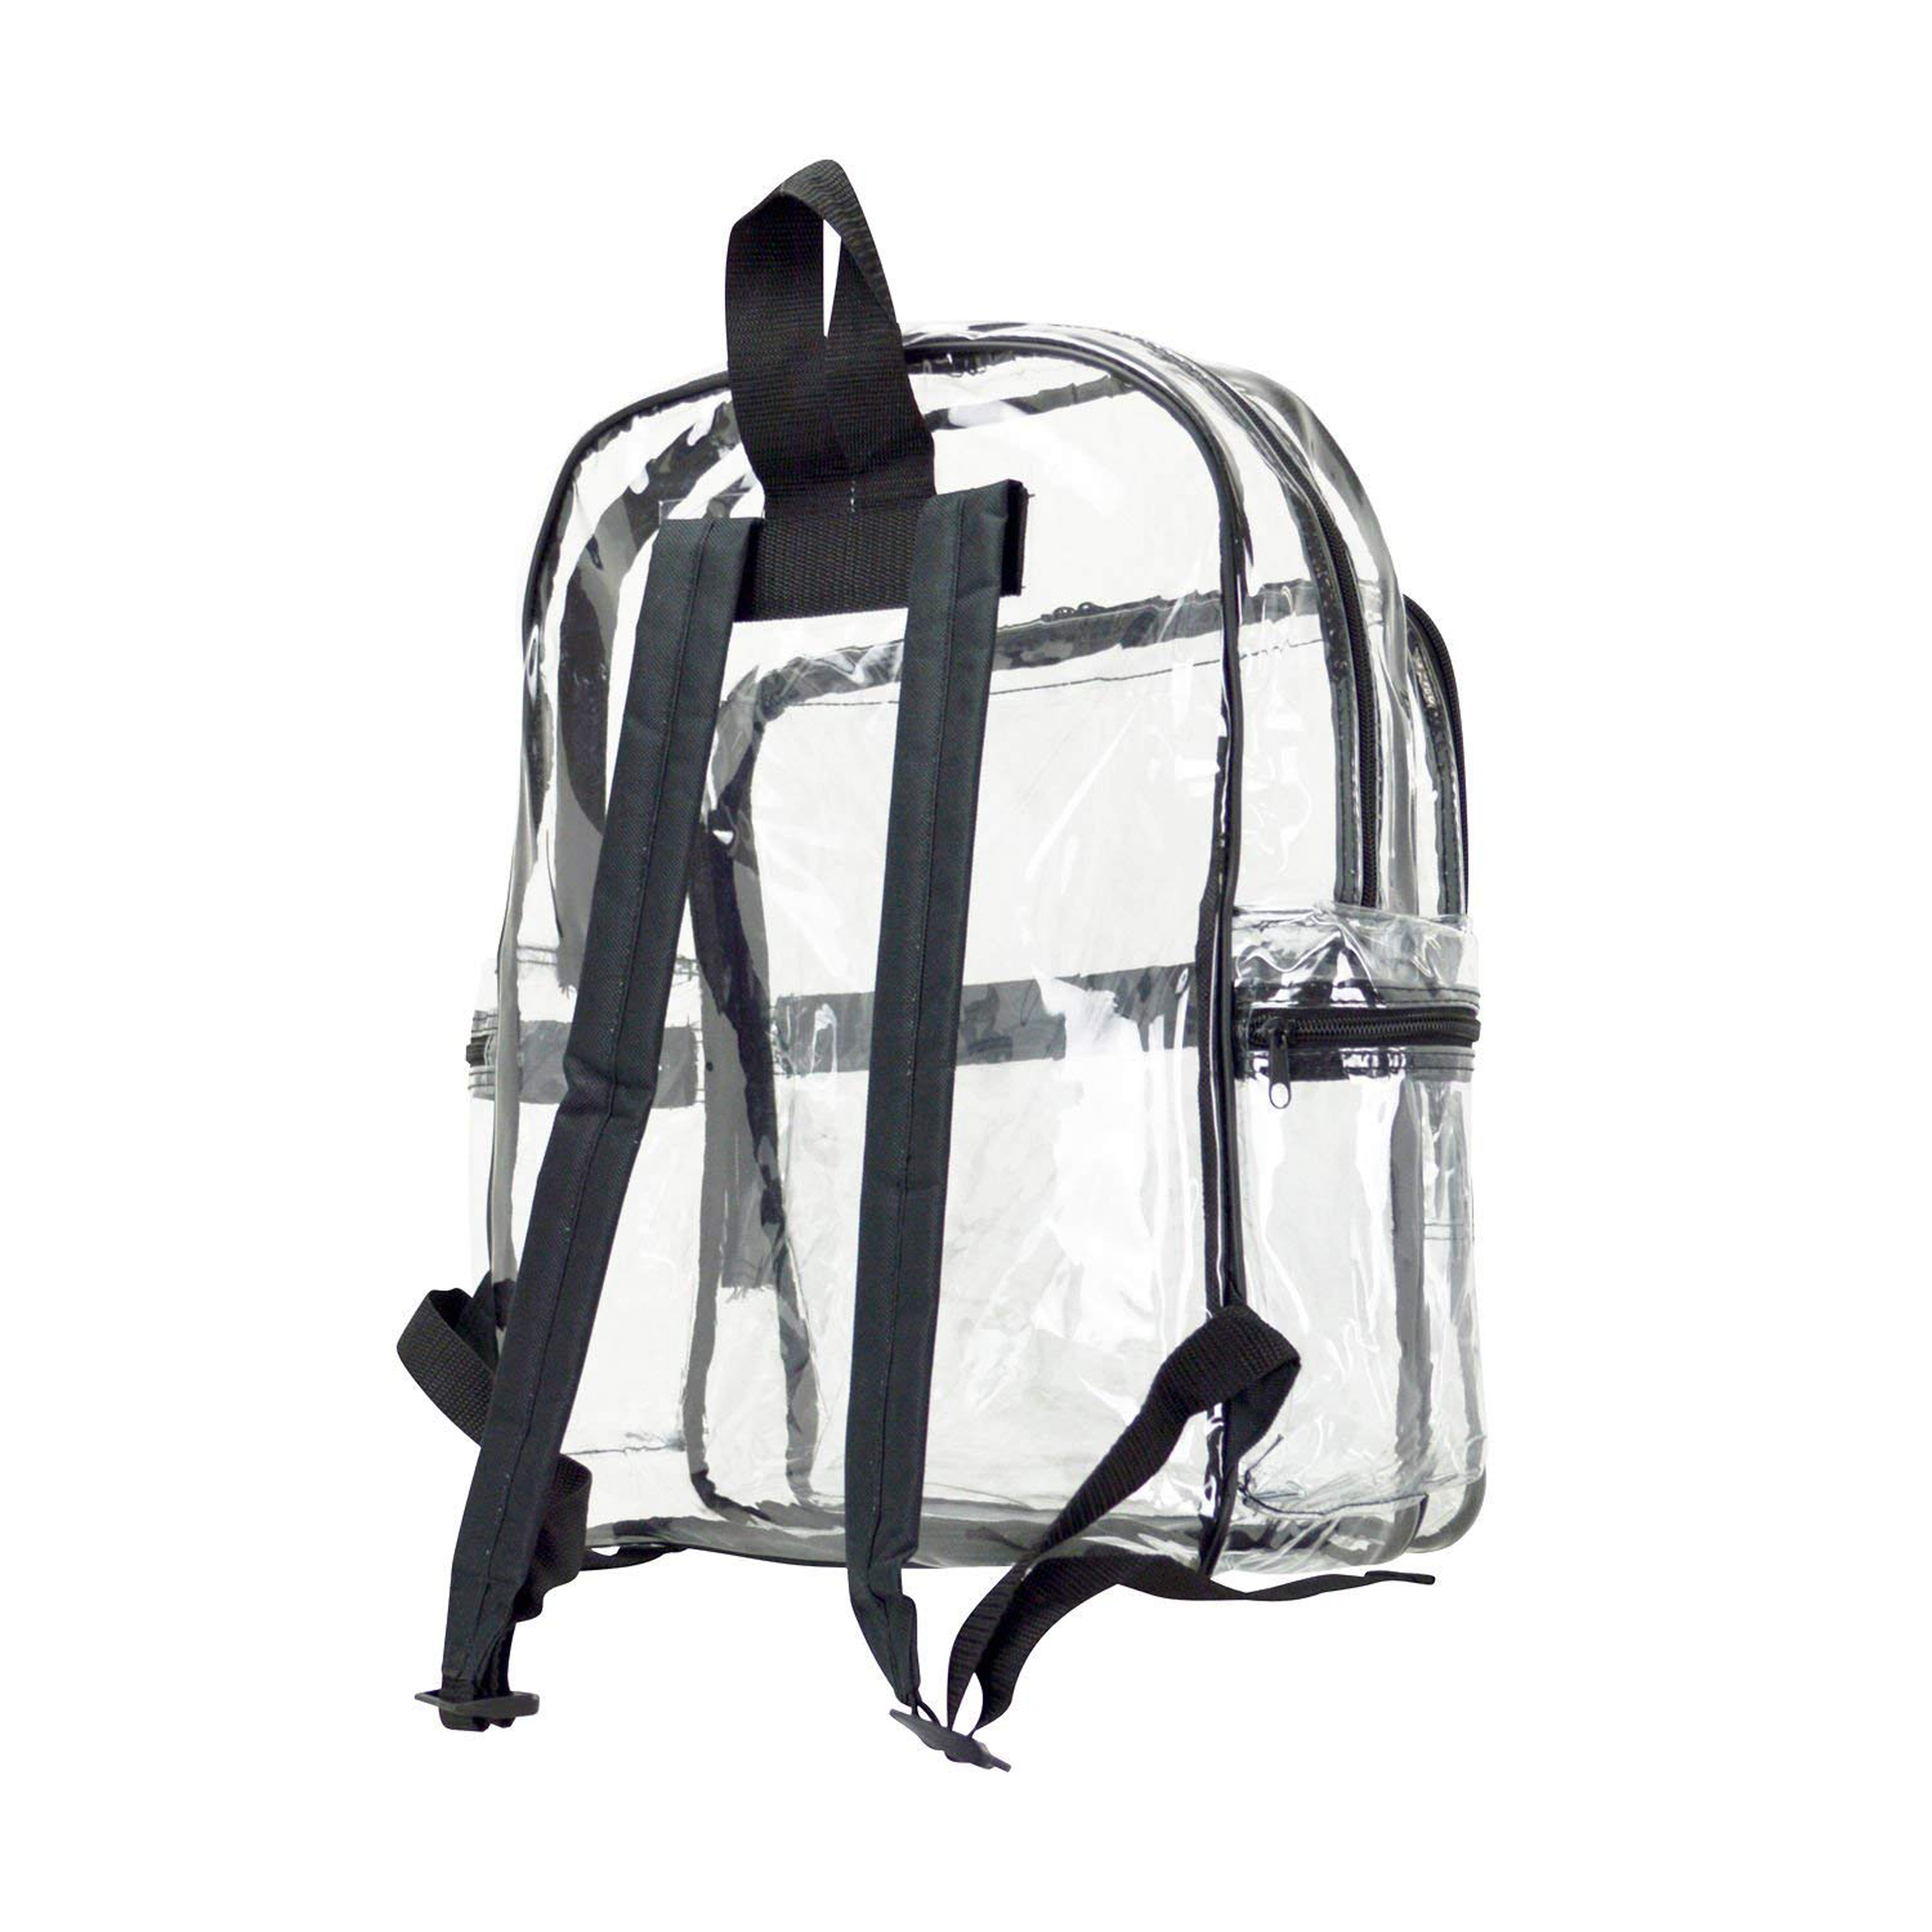 ImpecGear Kid's Clear Backpack, Adults School Clear Backpack, Outdoor Transparent Backpacks. - image 4 of 5